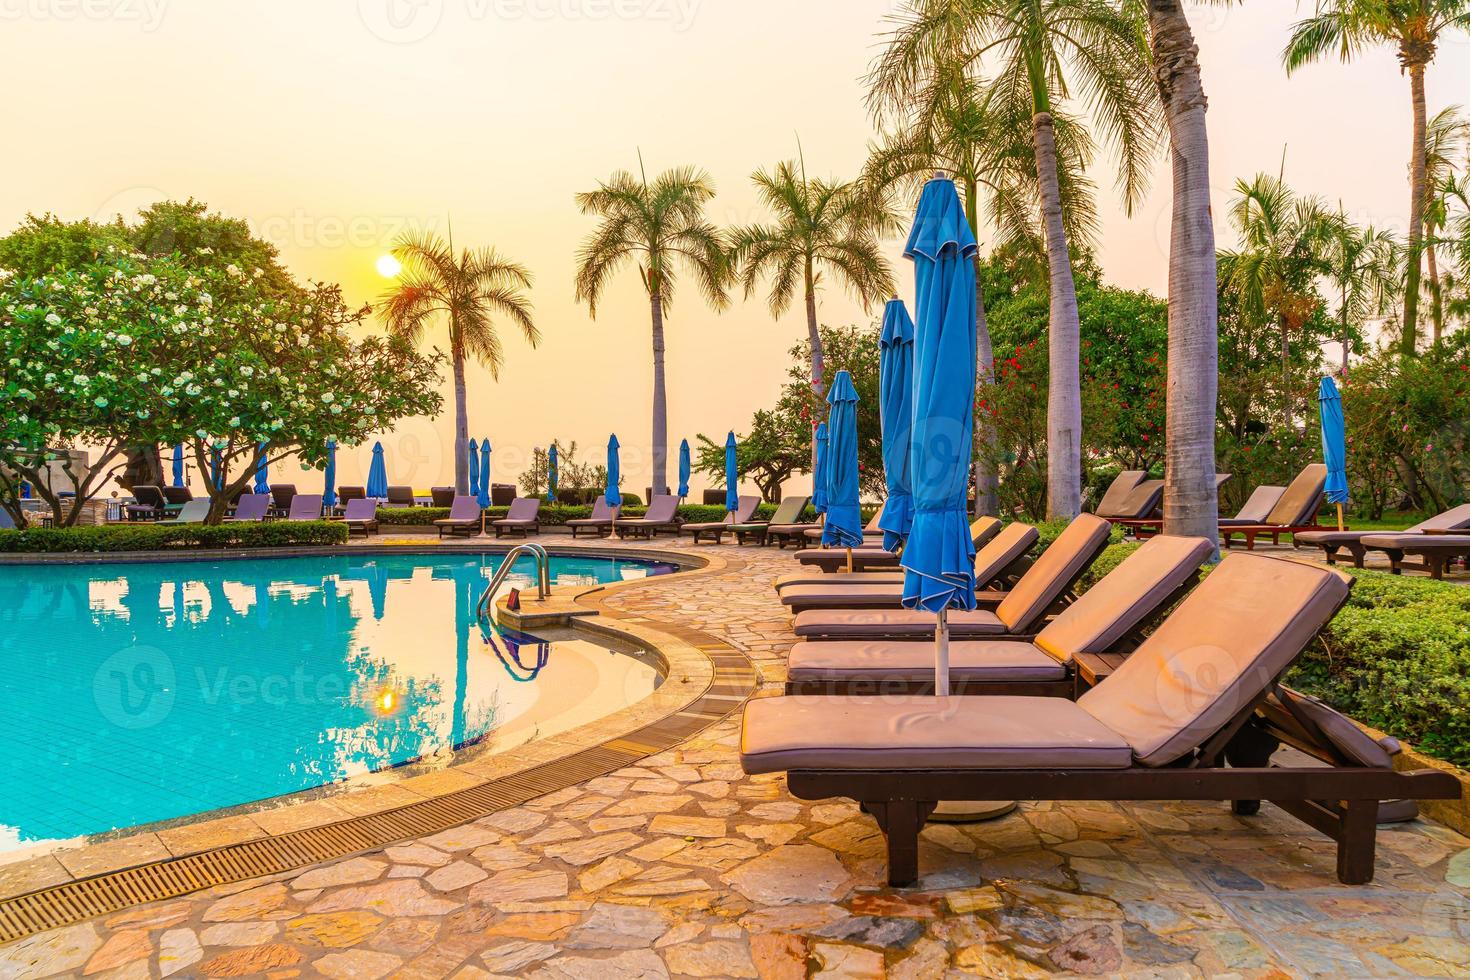 Beach chairs or pool beds with umbrellas around swimming pool at sunset time photo